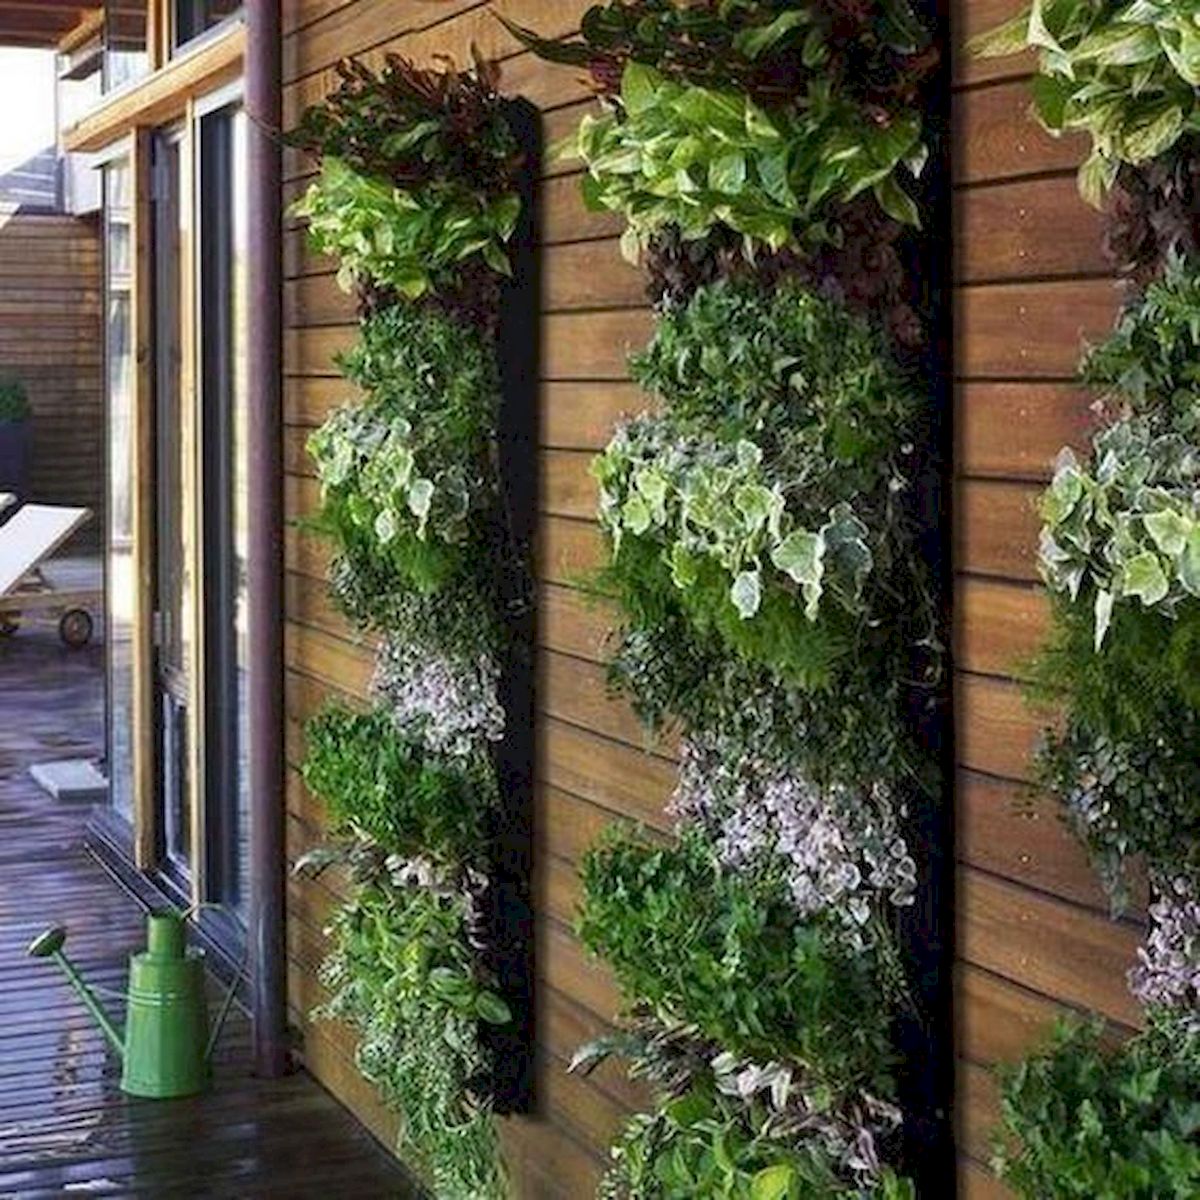 From Floors To Walls: Exploring The Popularity Of Vertical Gardens